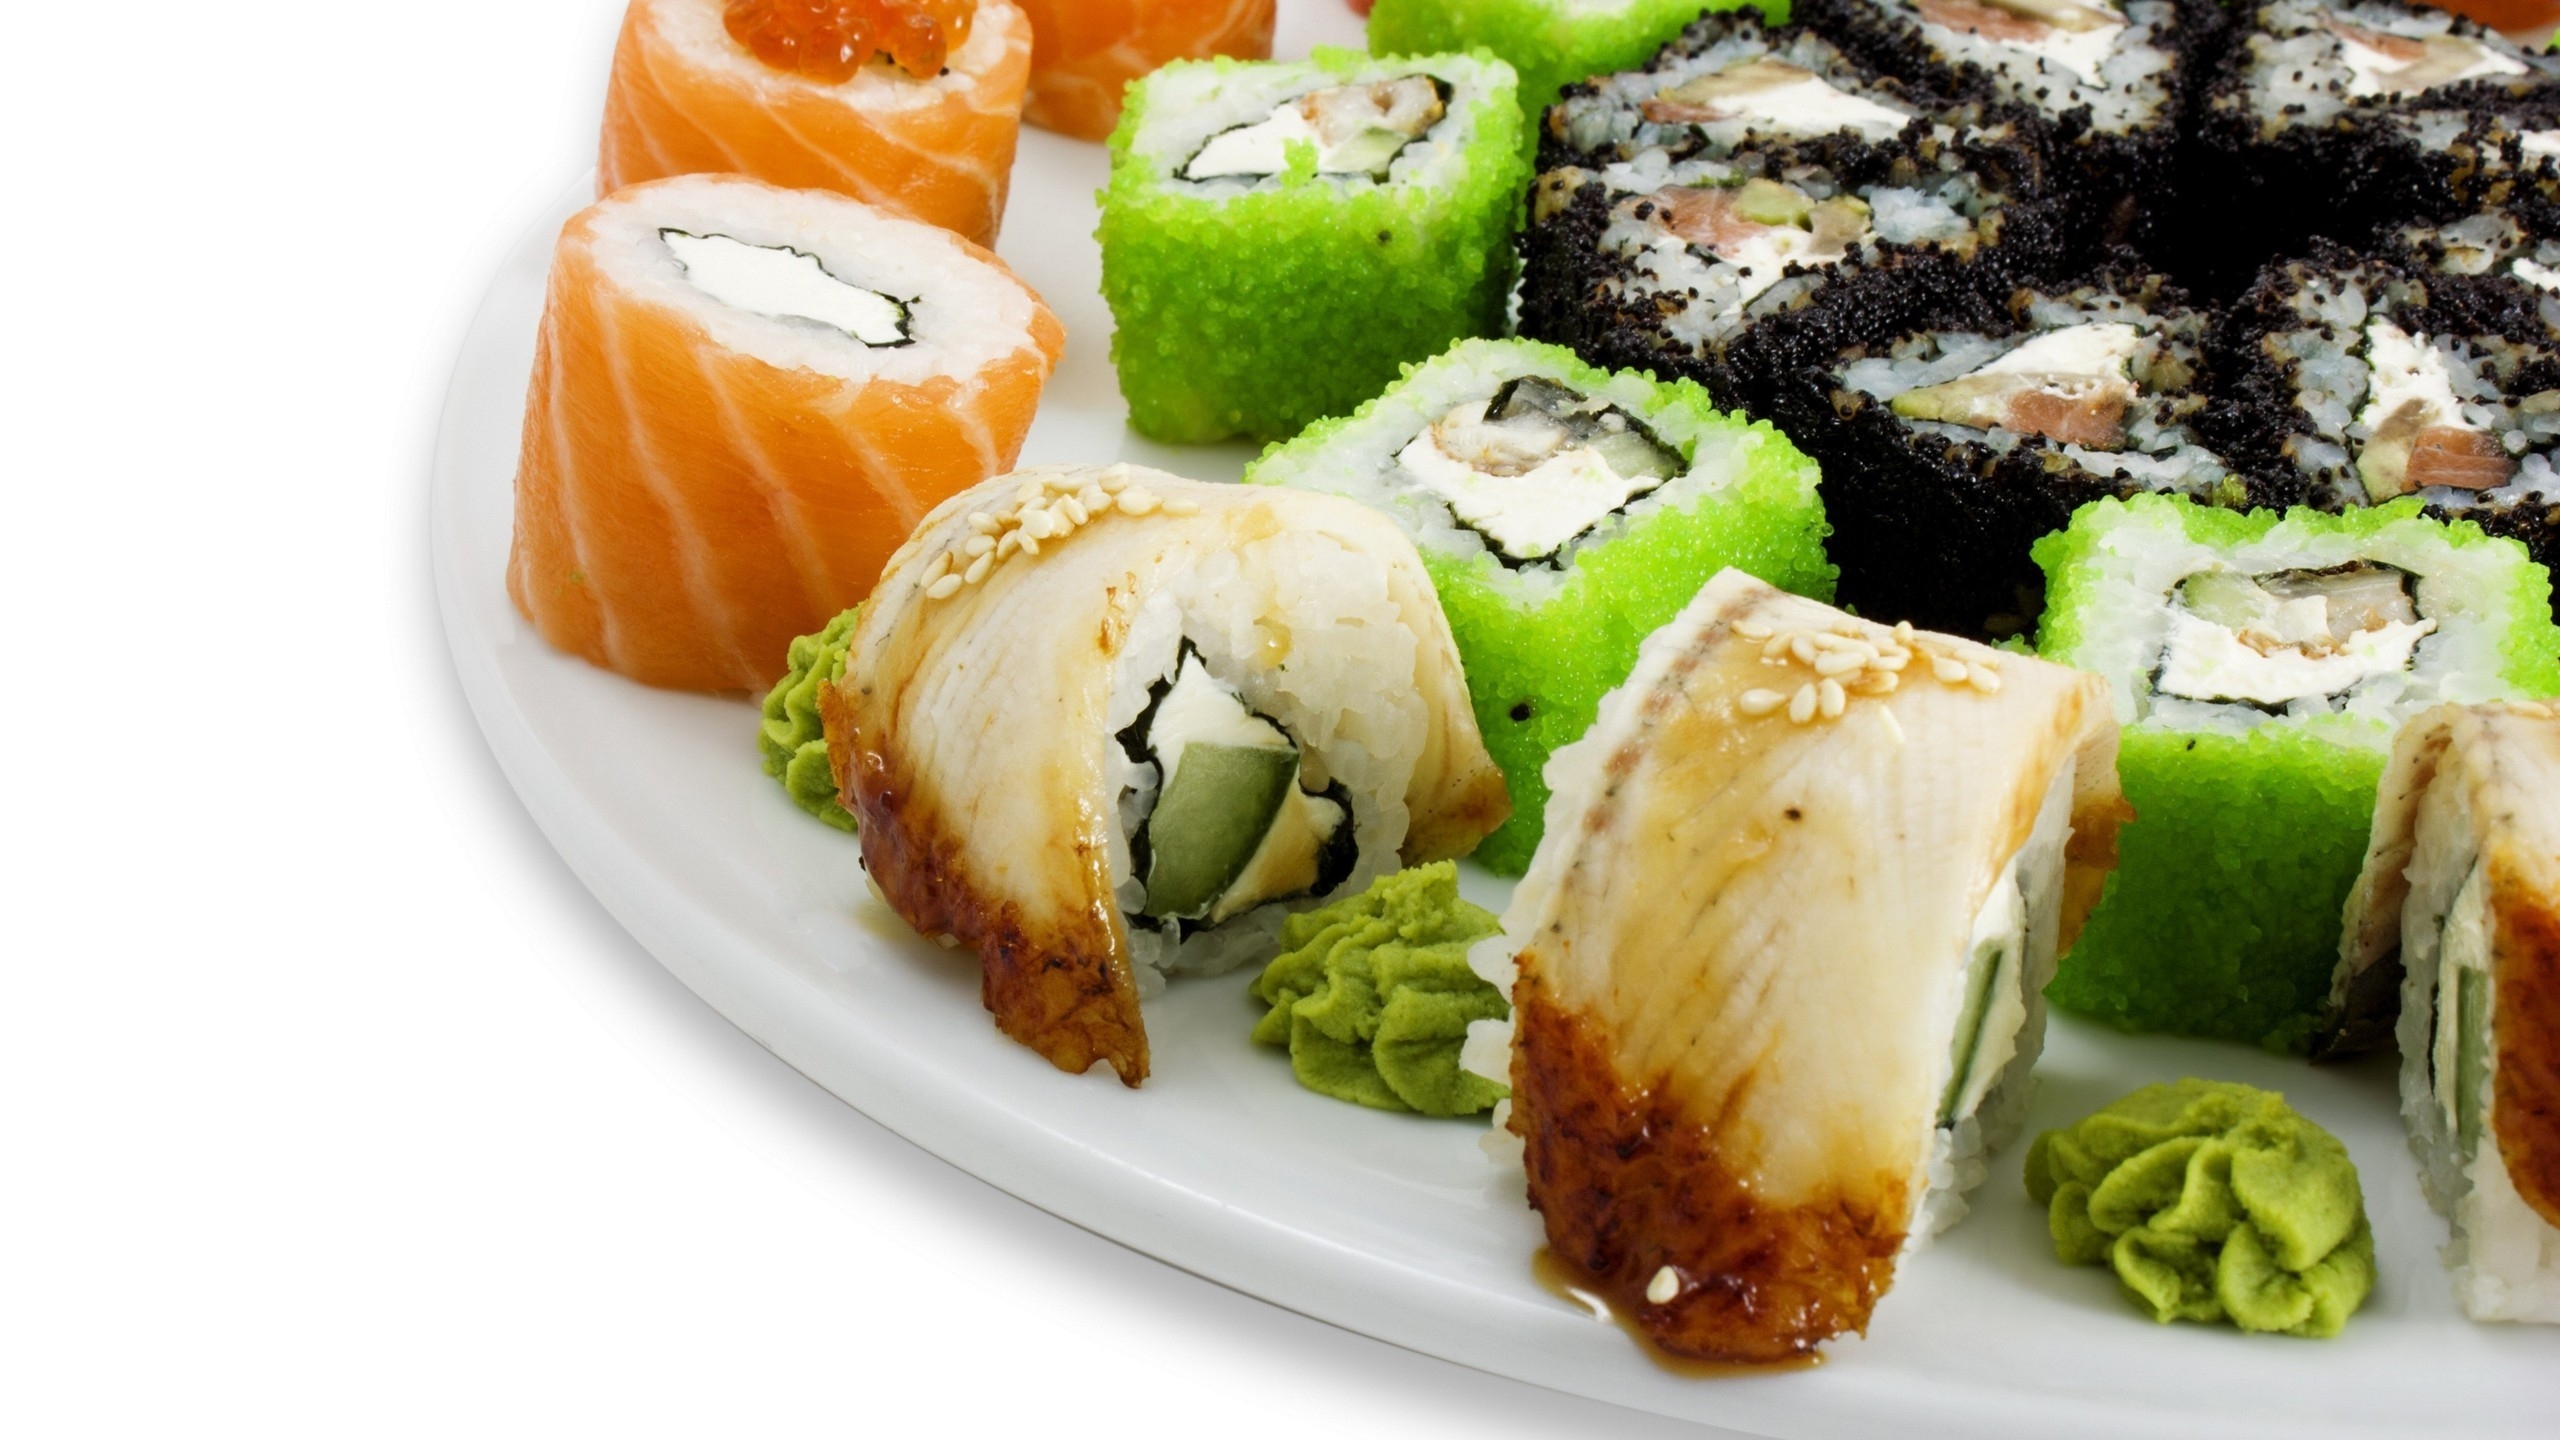 Mixed Sushi Plate for 2560x1440 HDTV resolution